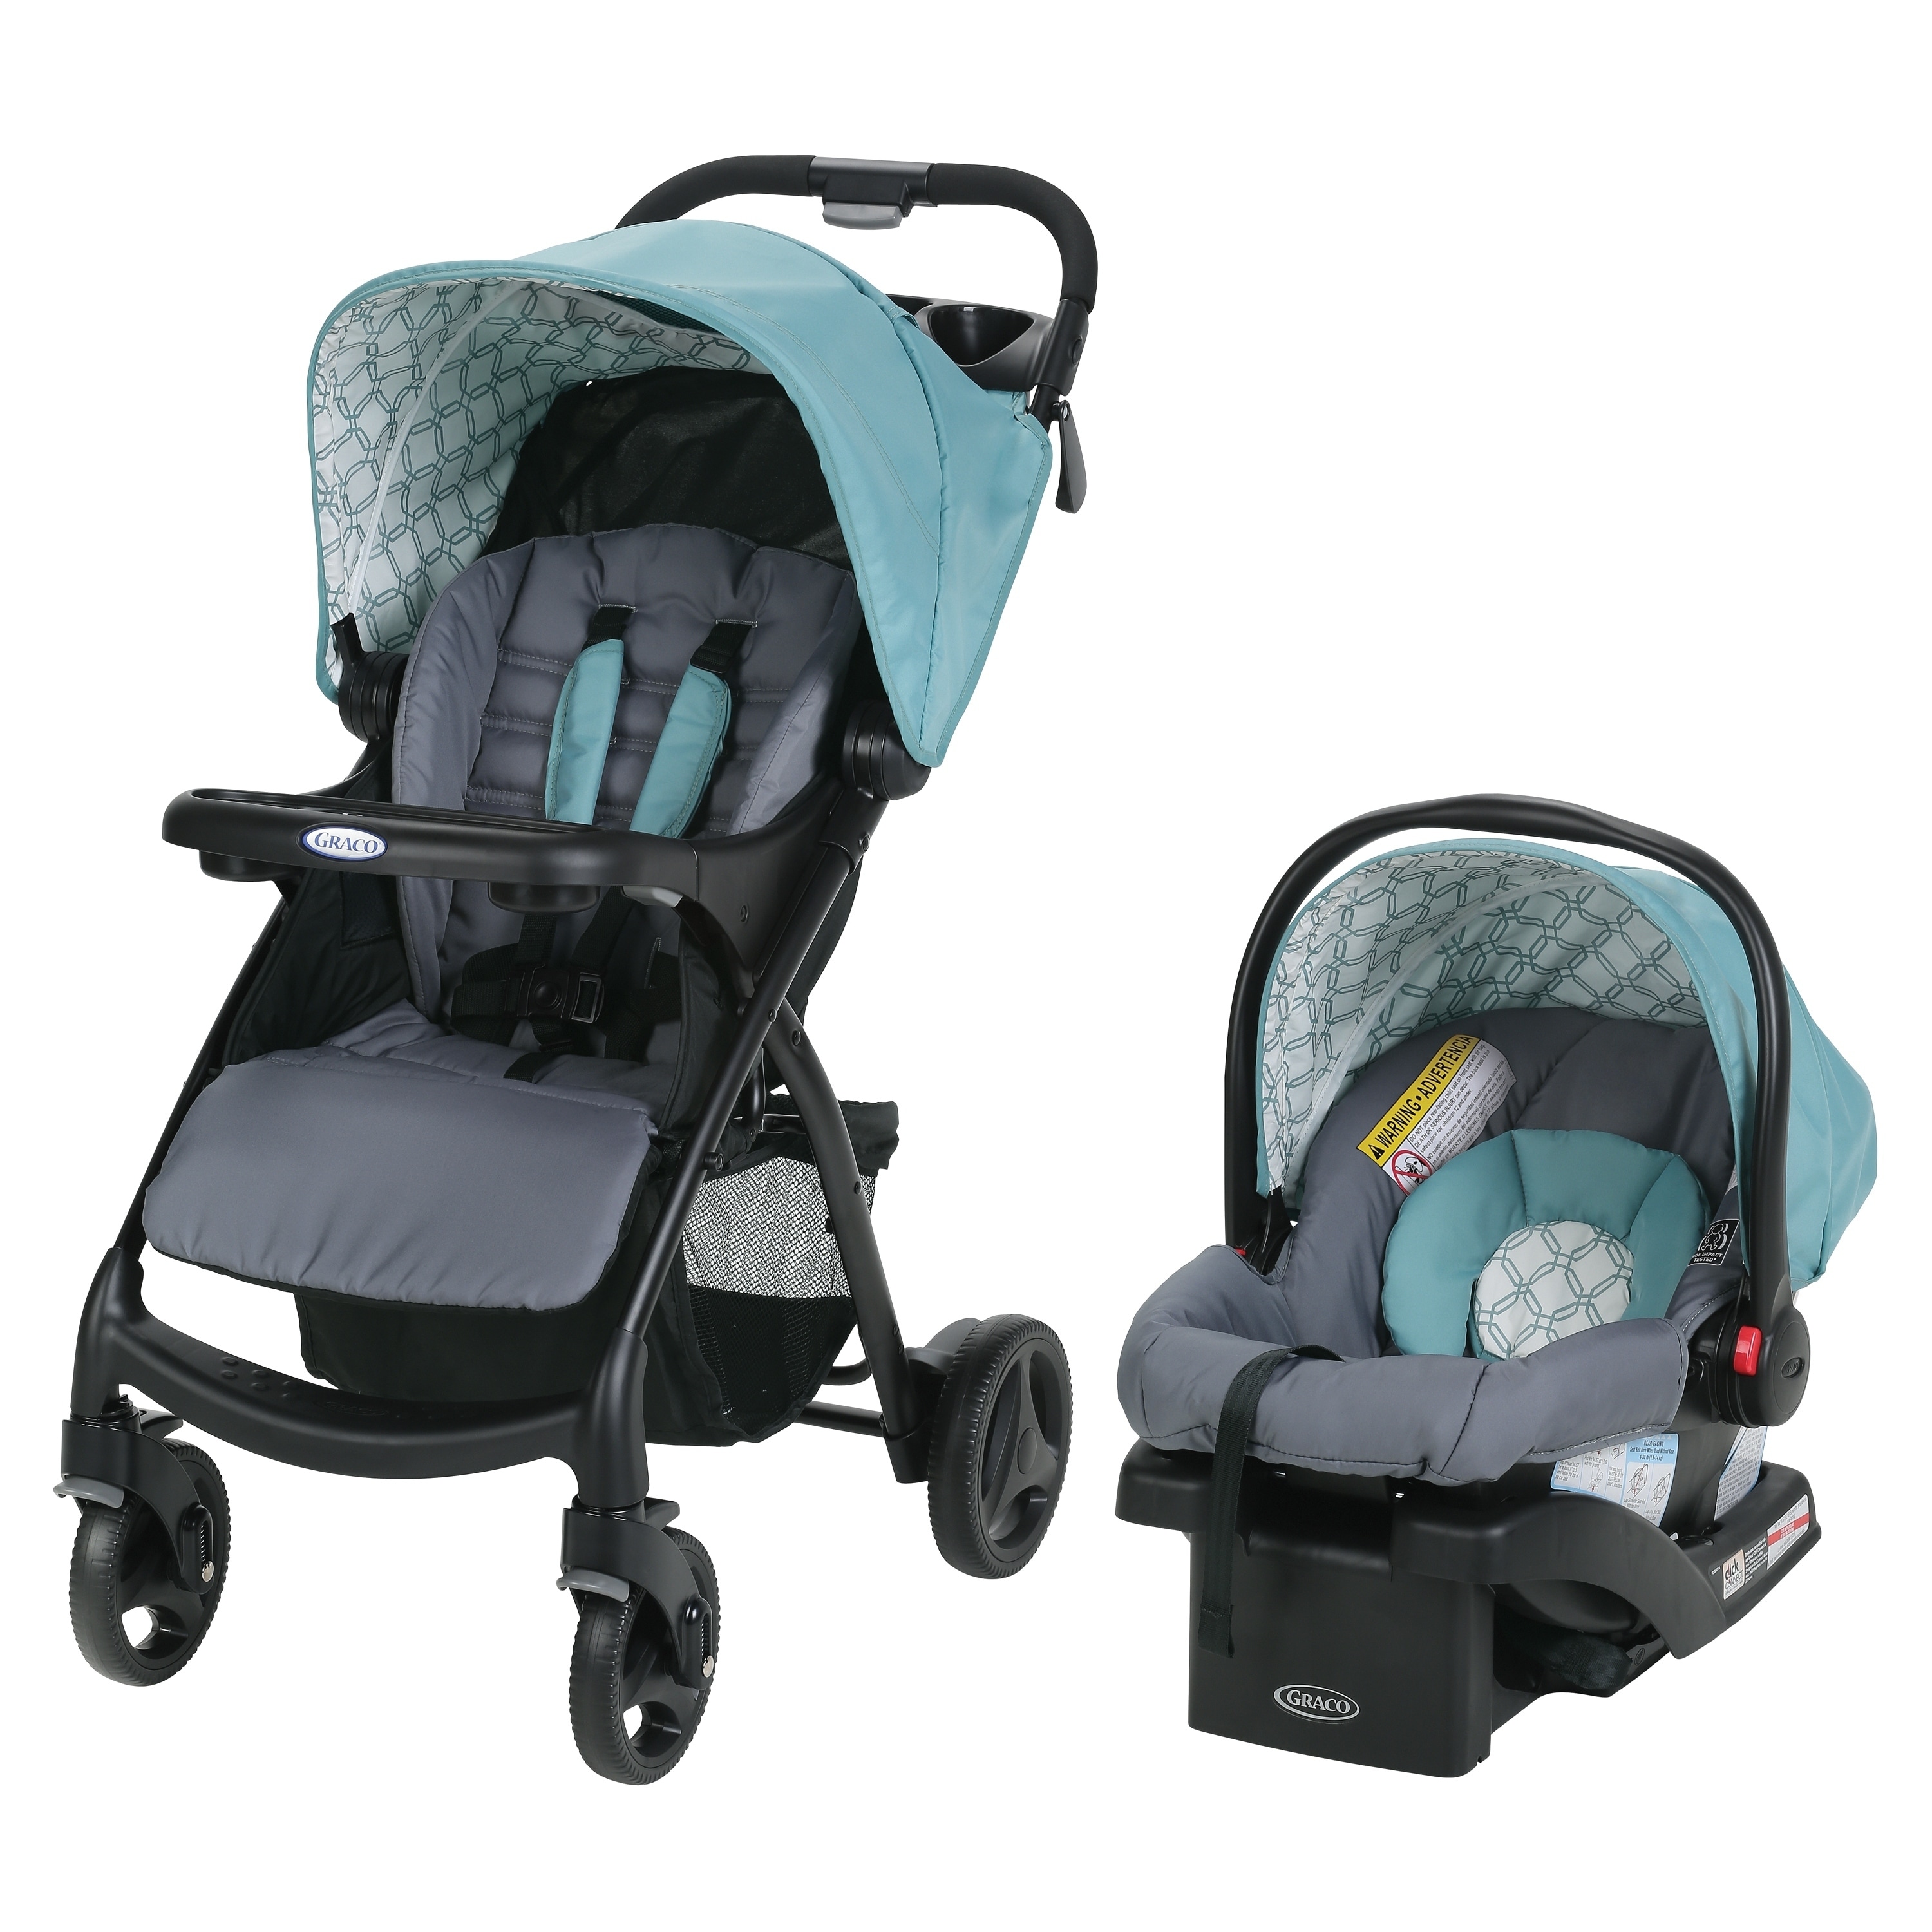 Graco Verb Click Connect Travel System